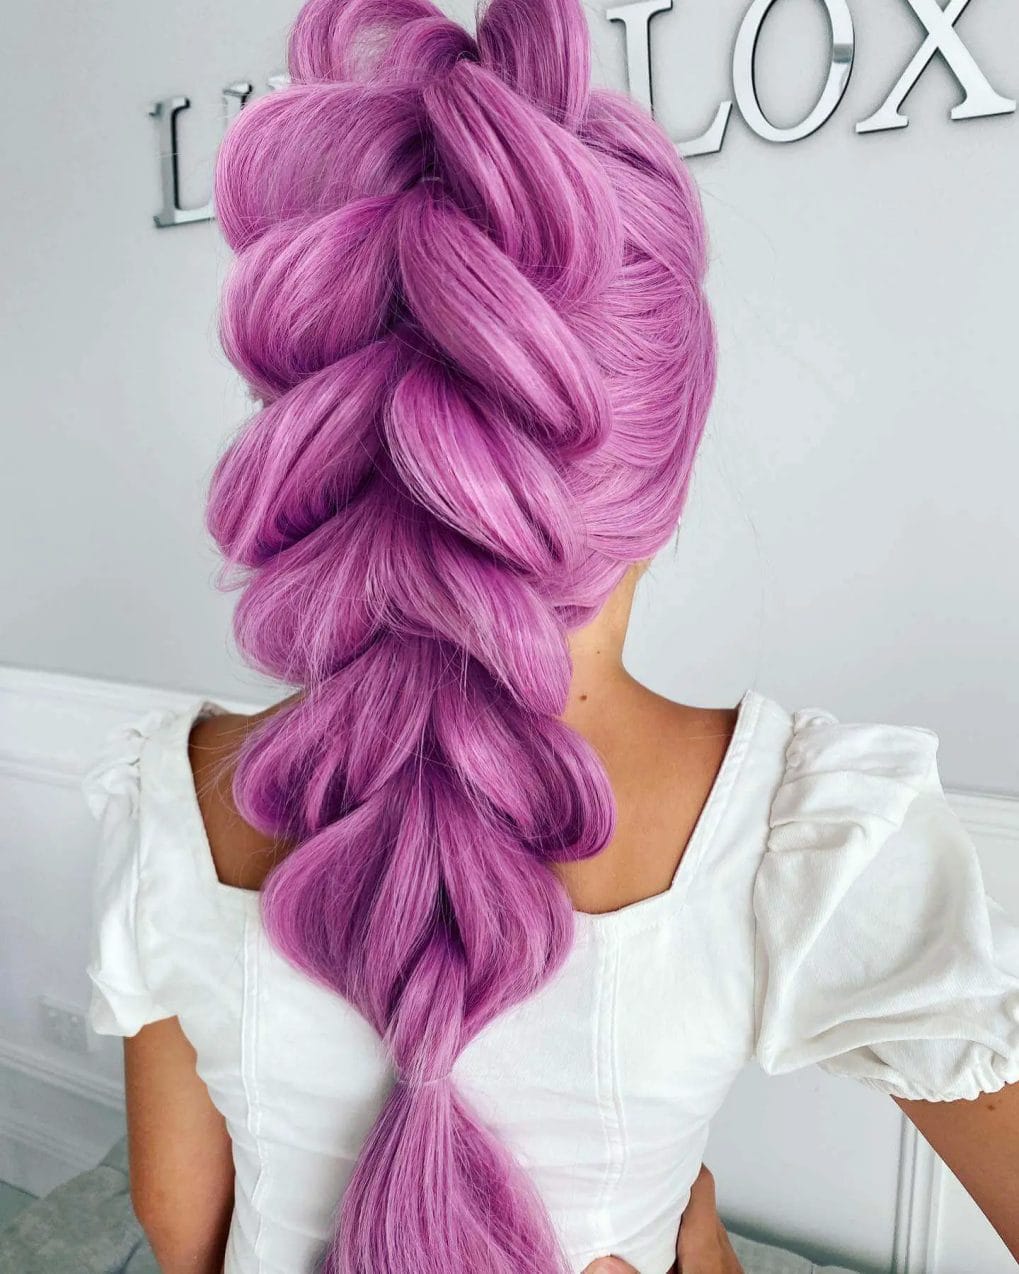 Vivid lilac bubble braid ponytail with voluminous loops for a playful look.